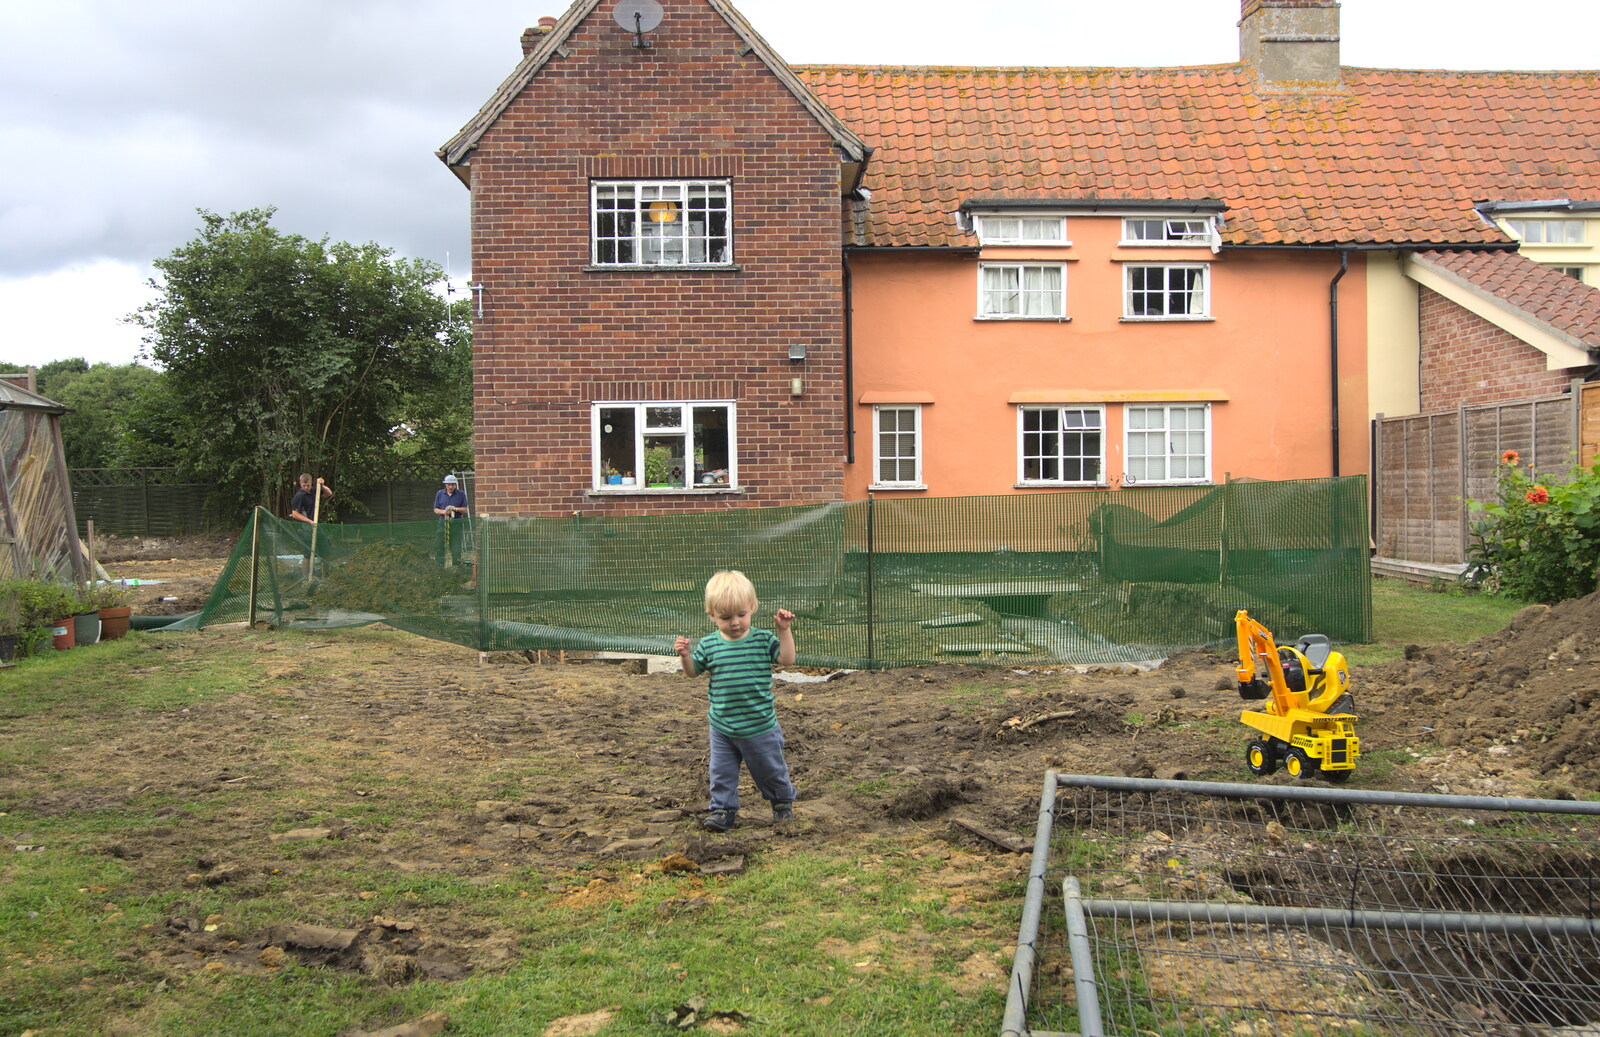 Harry stumps around from Grand Designs: Building Commences, Brome, Suffolk - 8th August 2013